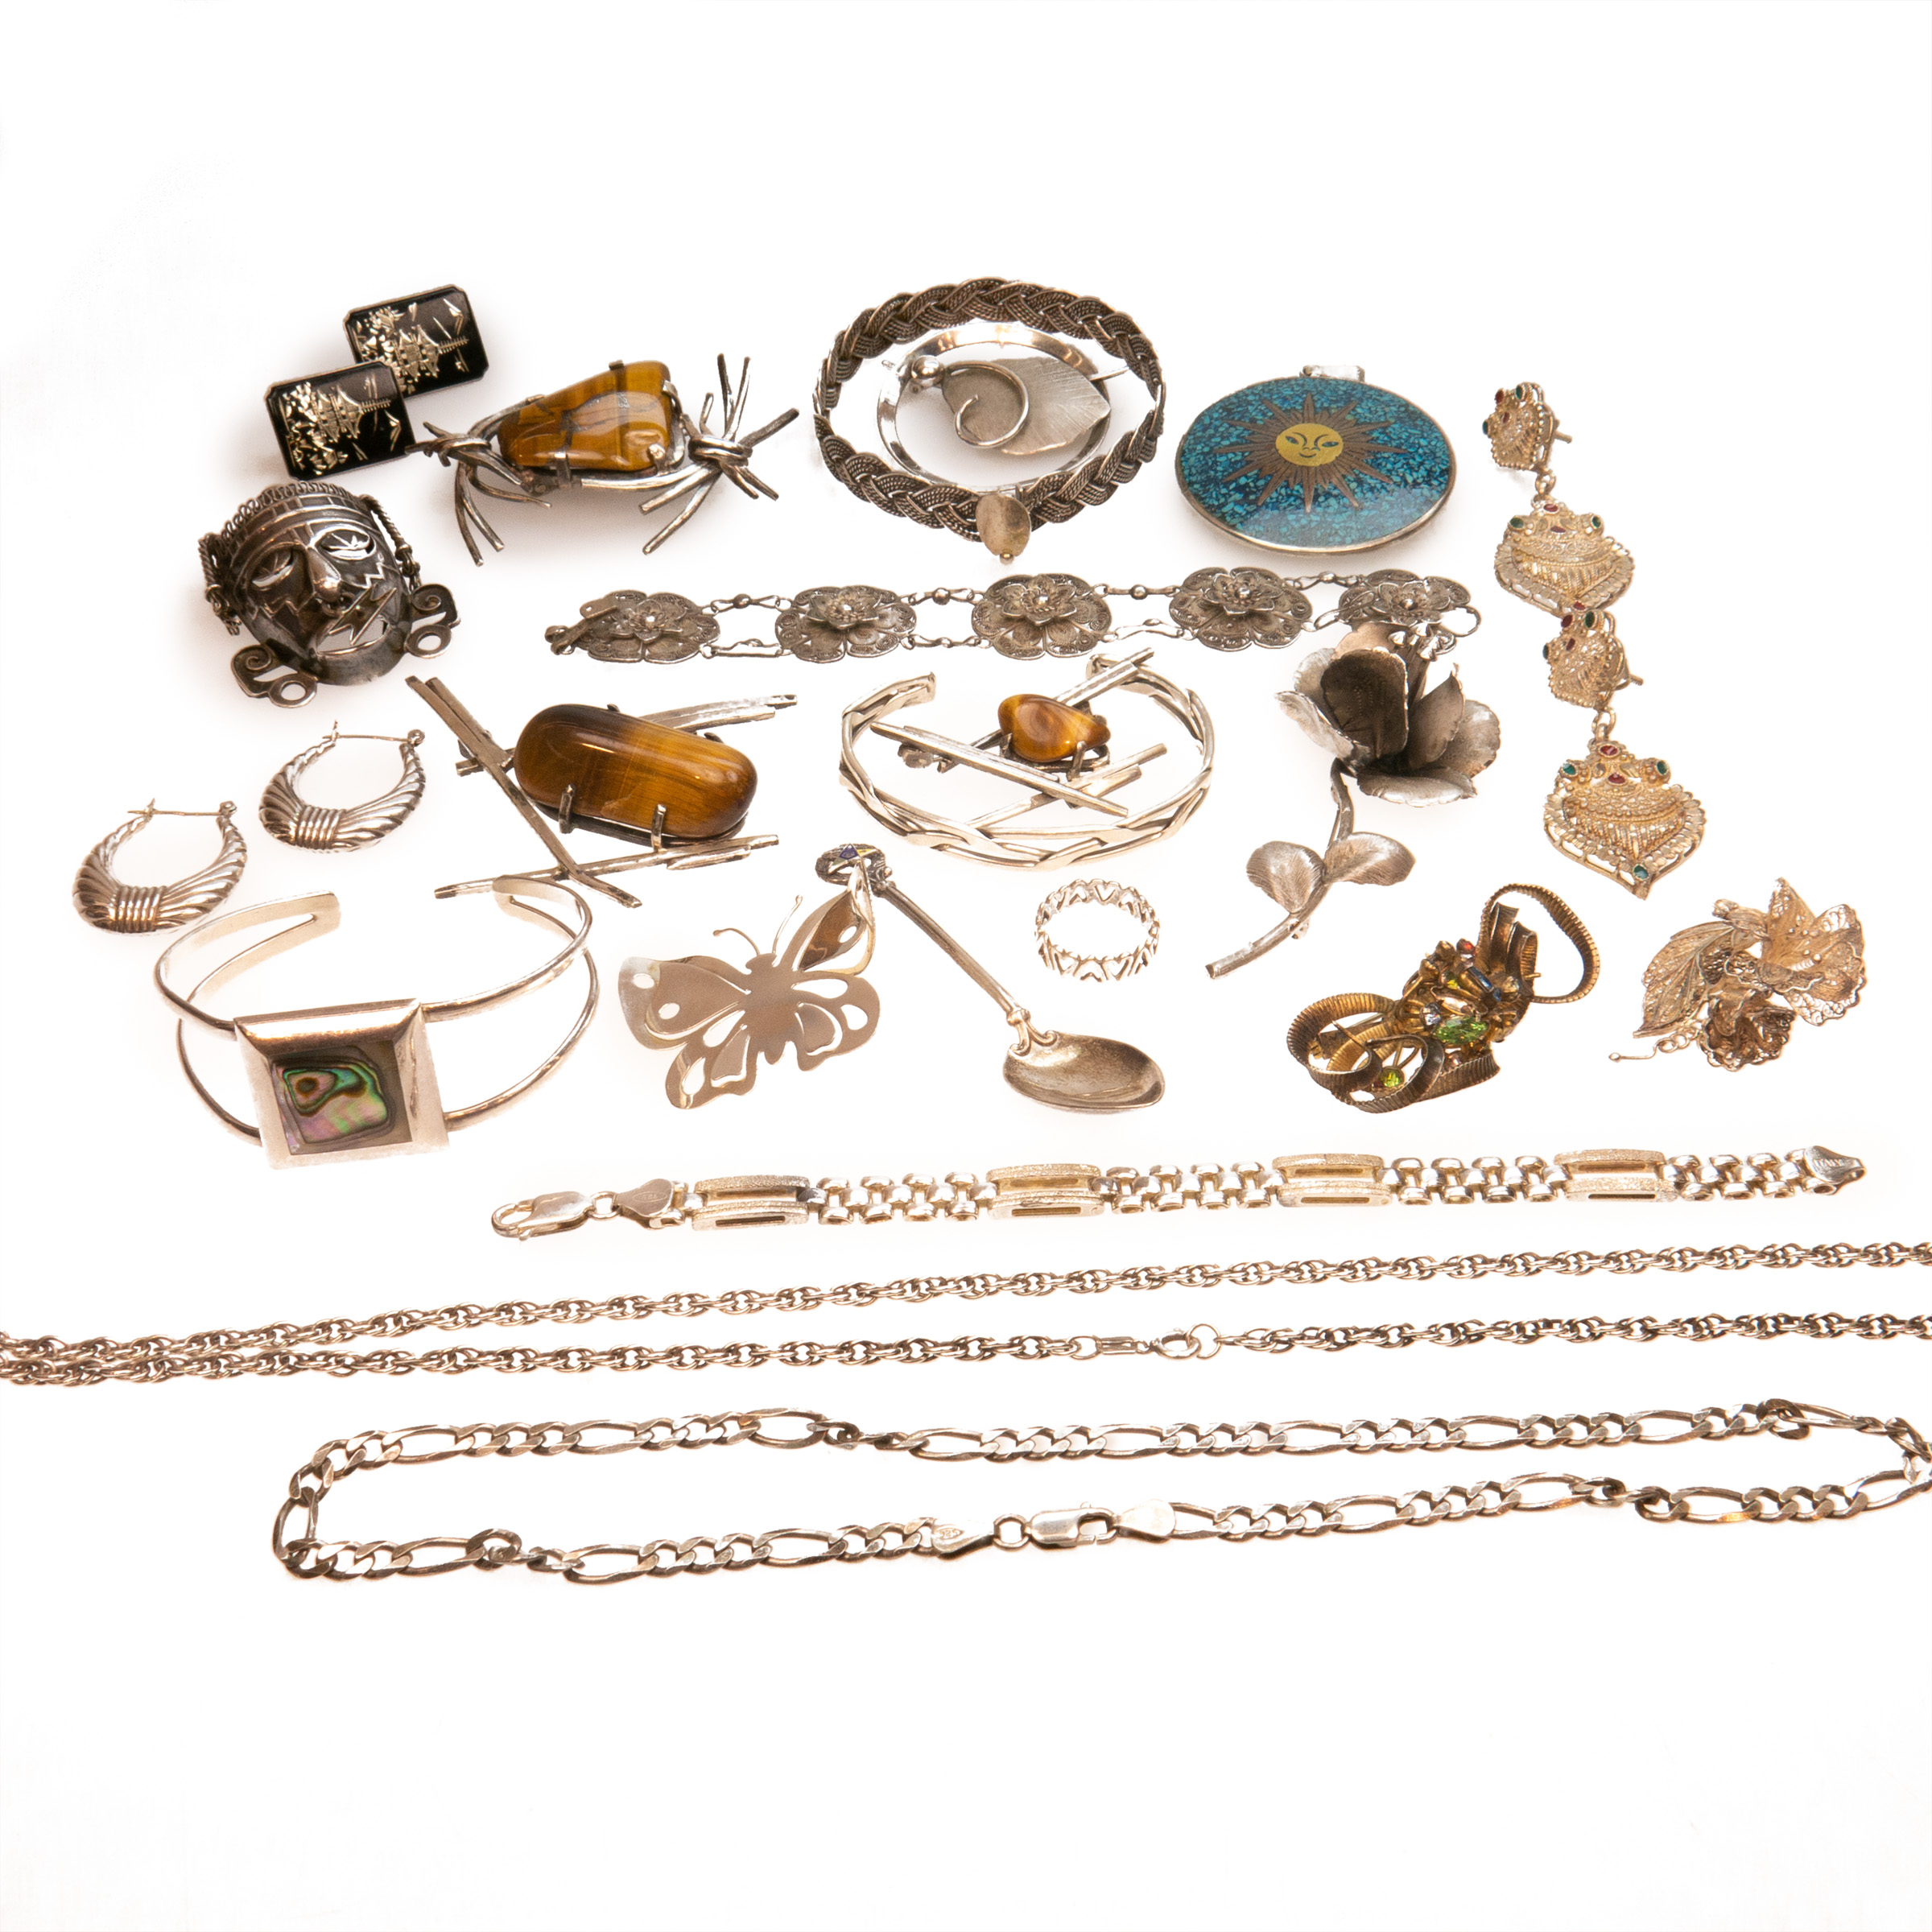 Quantity Of Silver And Silver Plated Jewellery